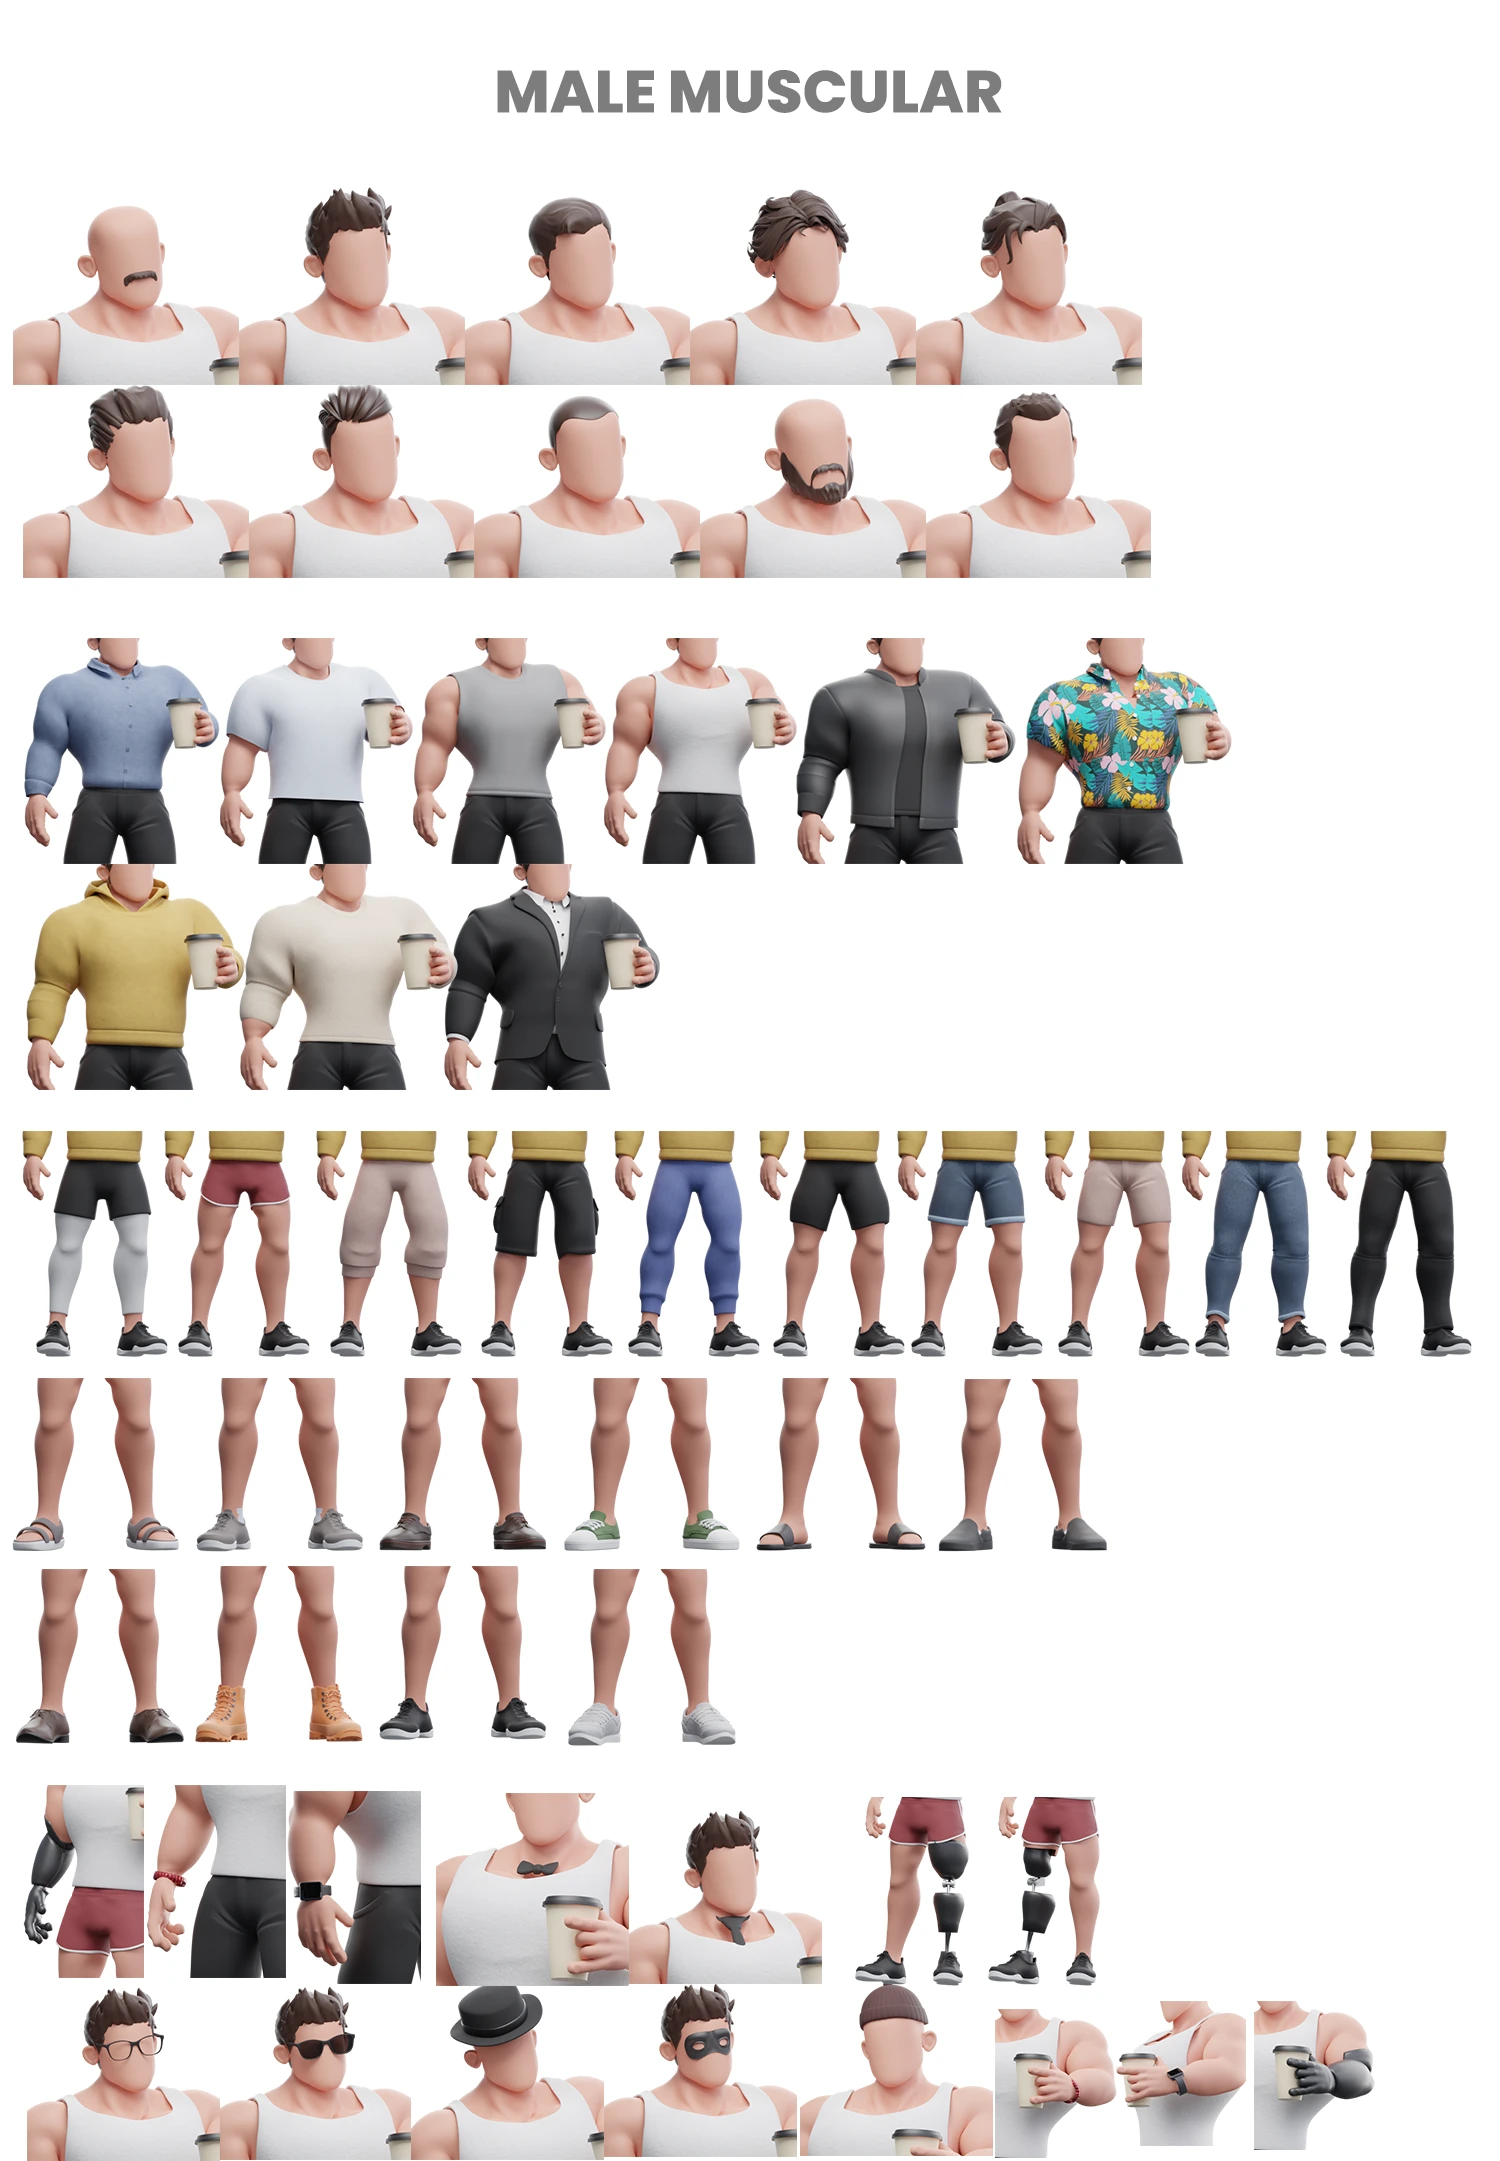 Cartoon 3D of muscular male with various clothes